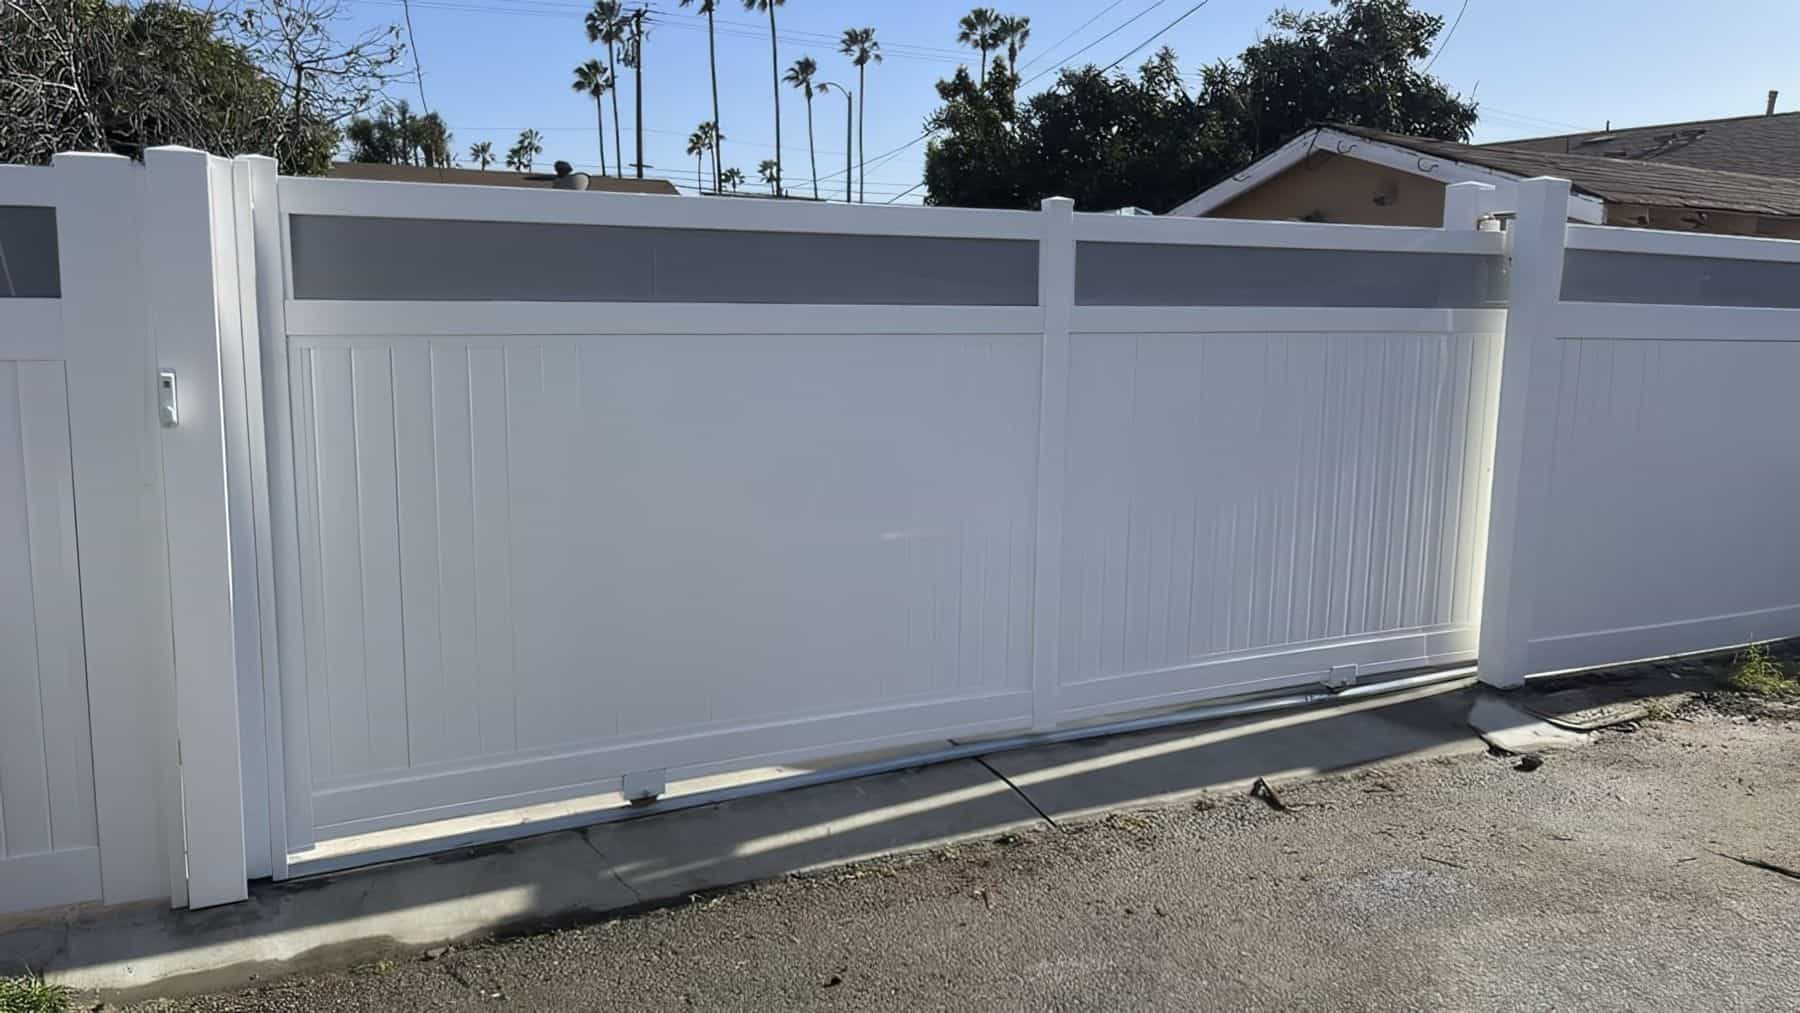 Tall vinyl rolling gate giving access to small suburban house driveway and fron yard from the road with improved security